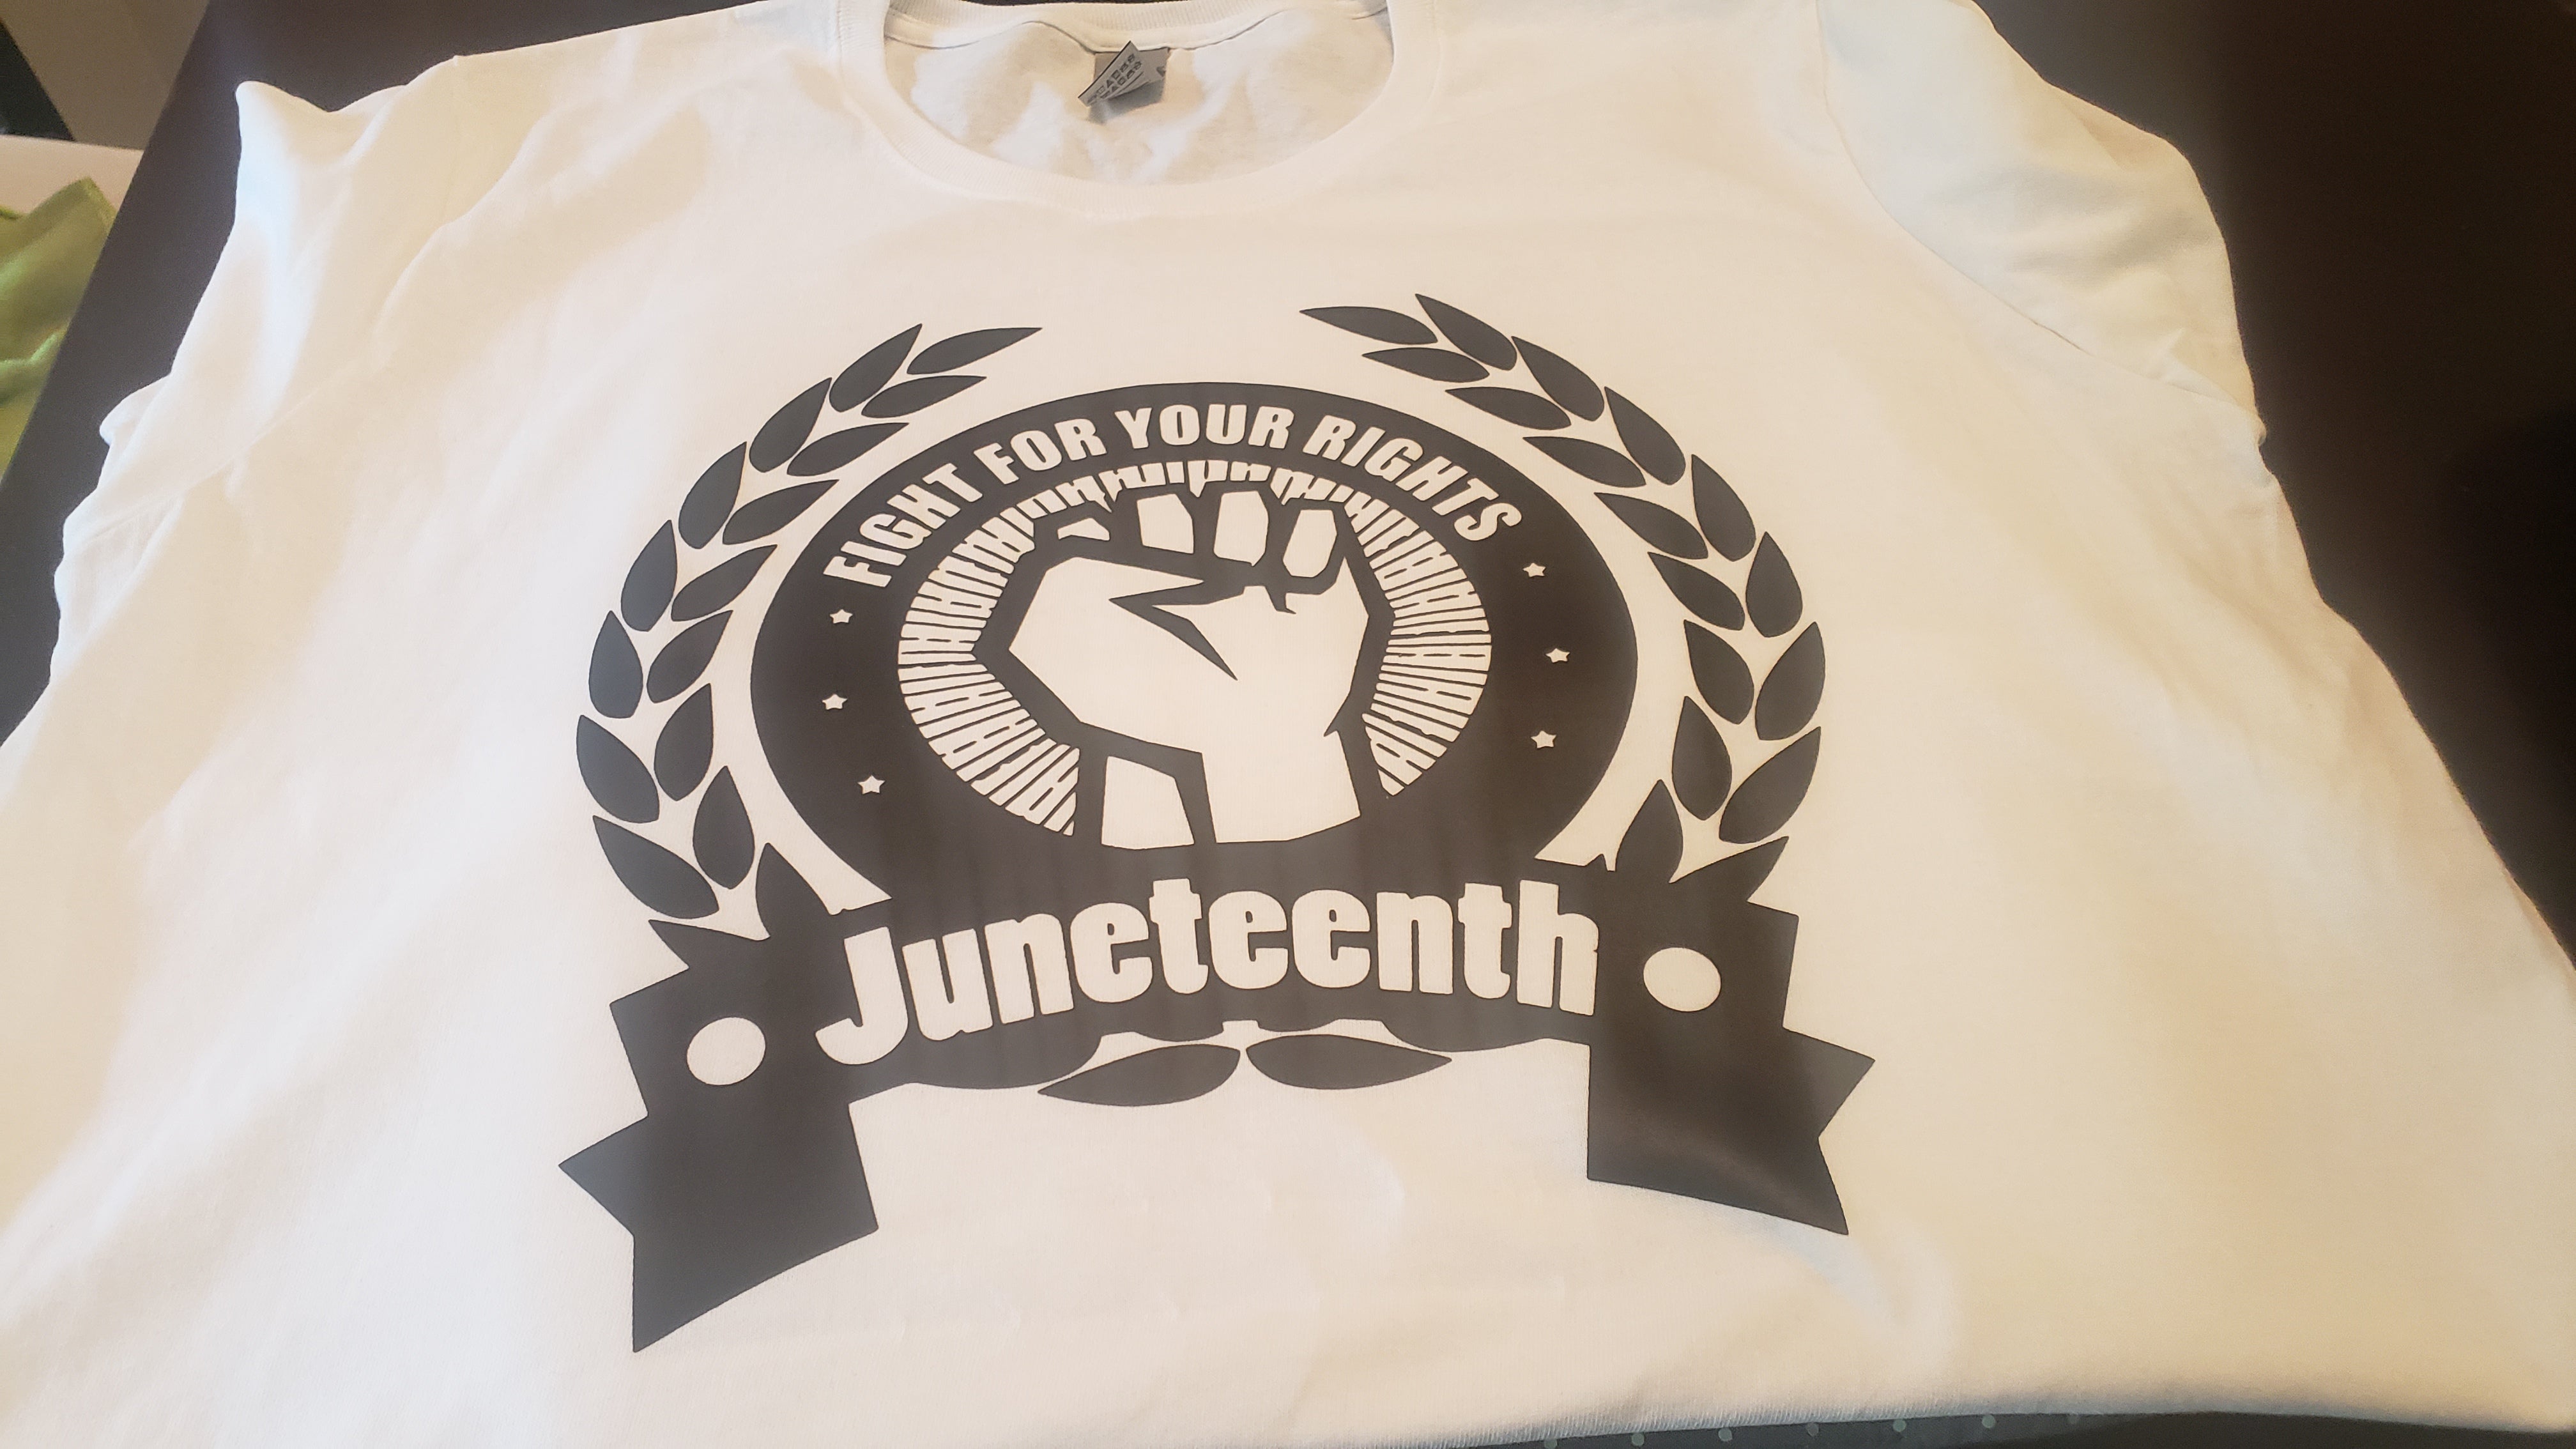 Juneteenth Fight For Your Rights